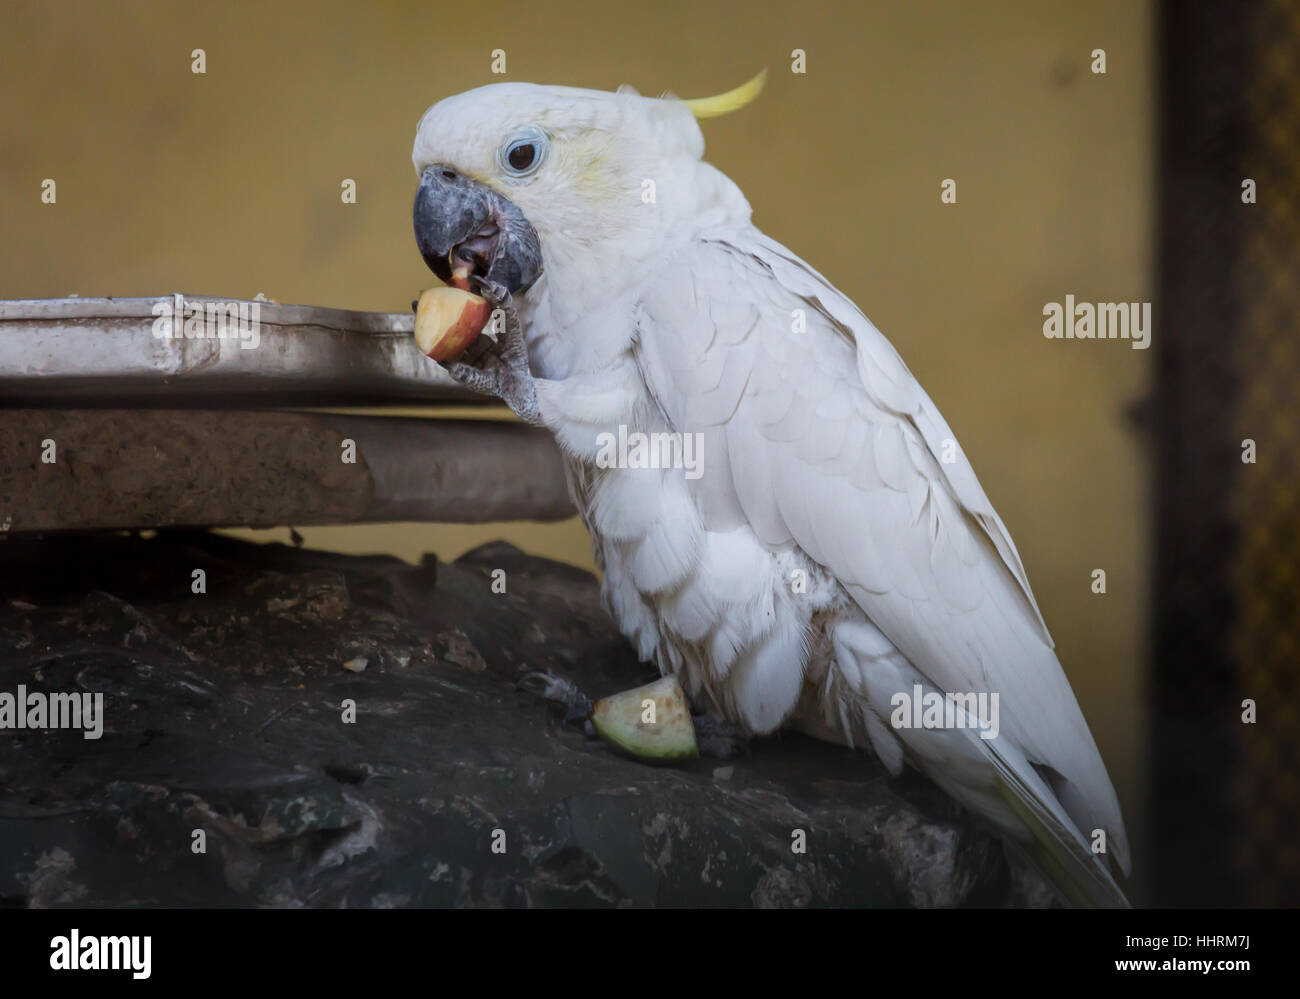 White cockatoo parrot eating fruits in his cage at a bird sanctuary in India. Stock Photo